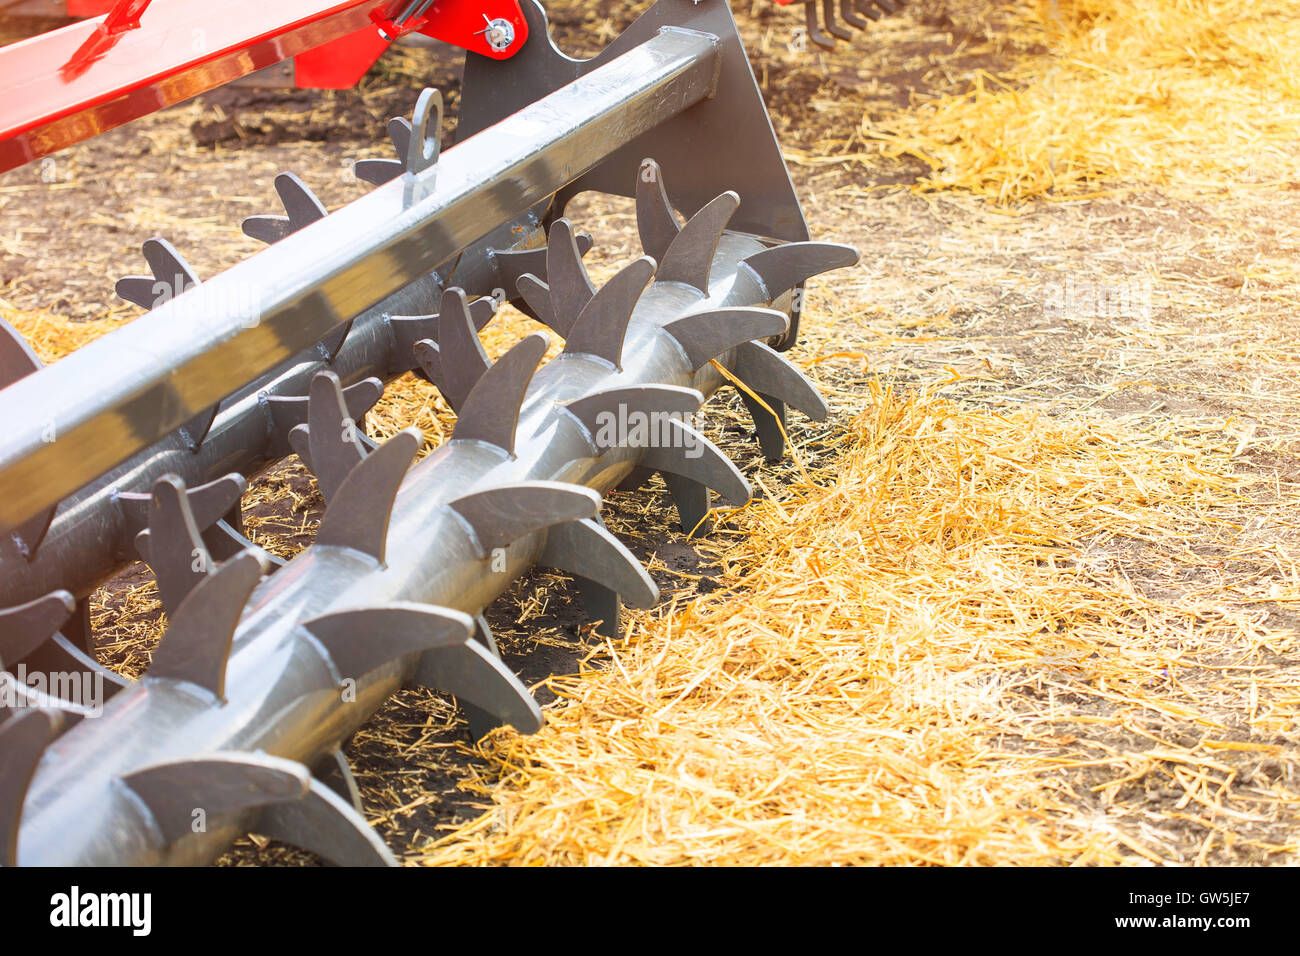 Agricultural cultivator close-up on the ground, farm equipment Stock Photo